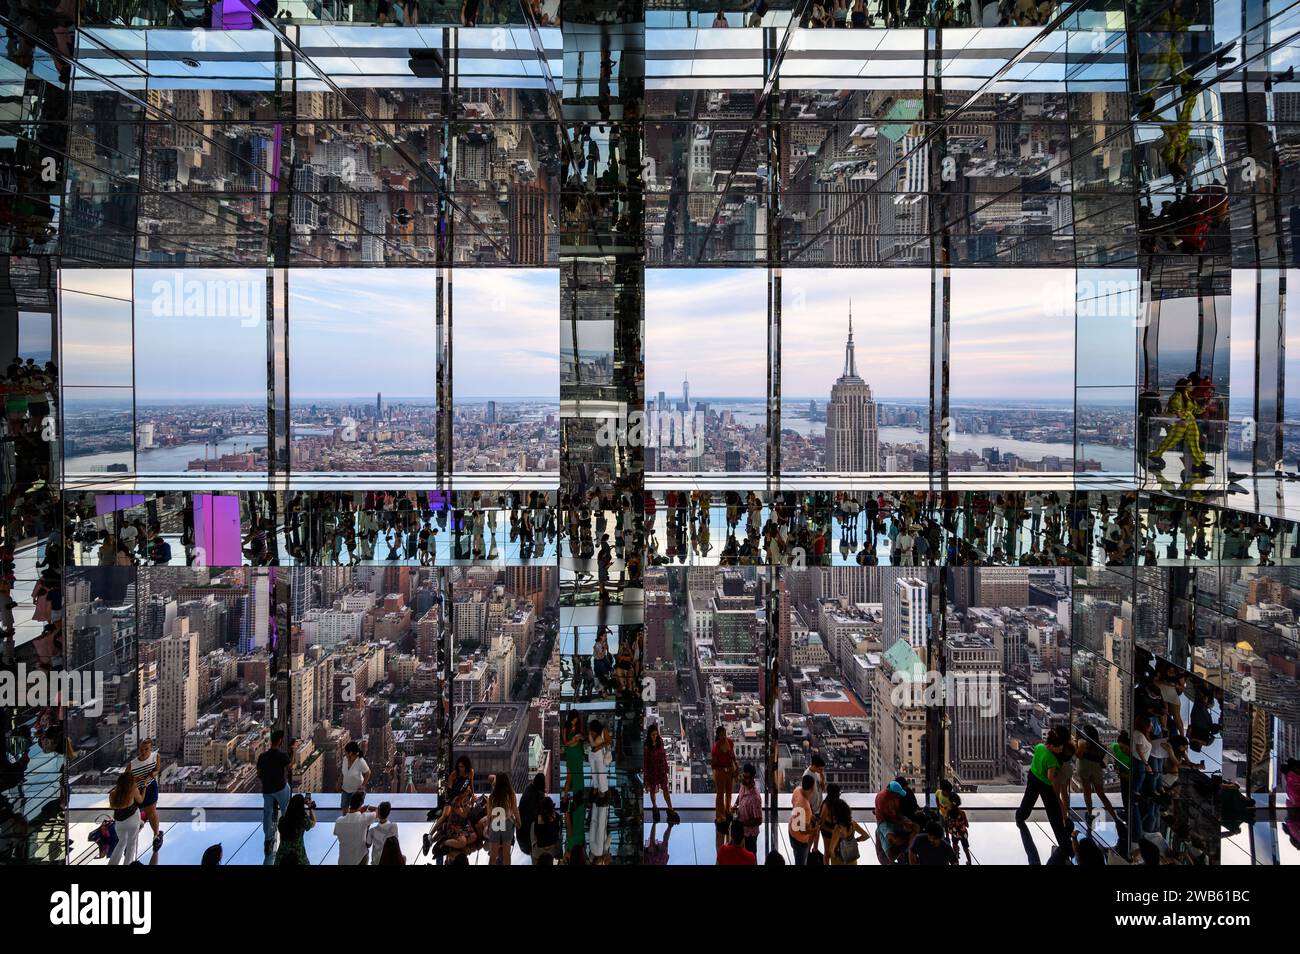 Tourists and visitors enjoying the mirrored observation deck at Summit One Vanderbilt in New York, USA. Stock Photo